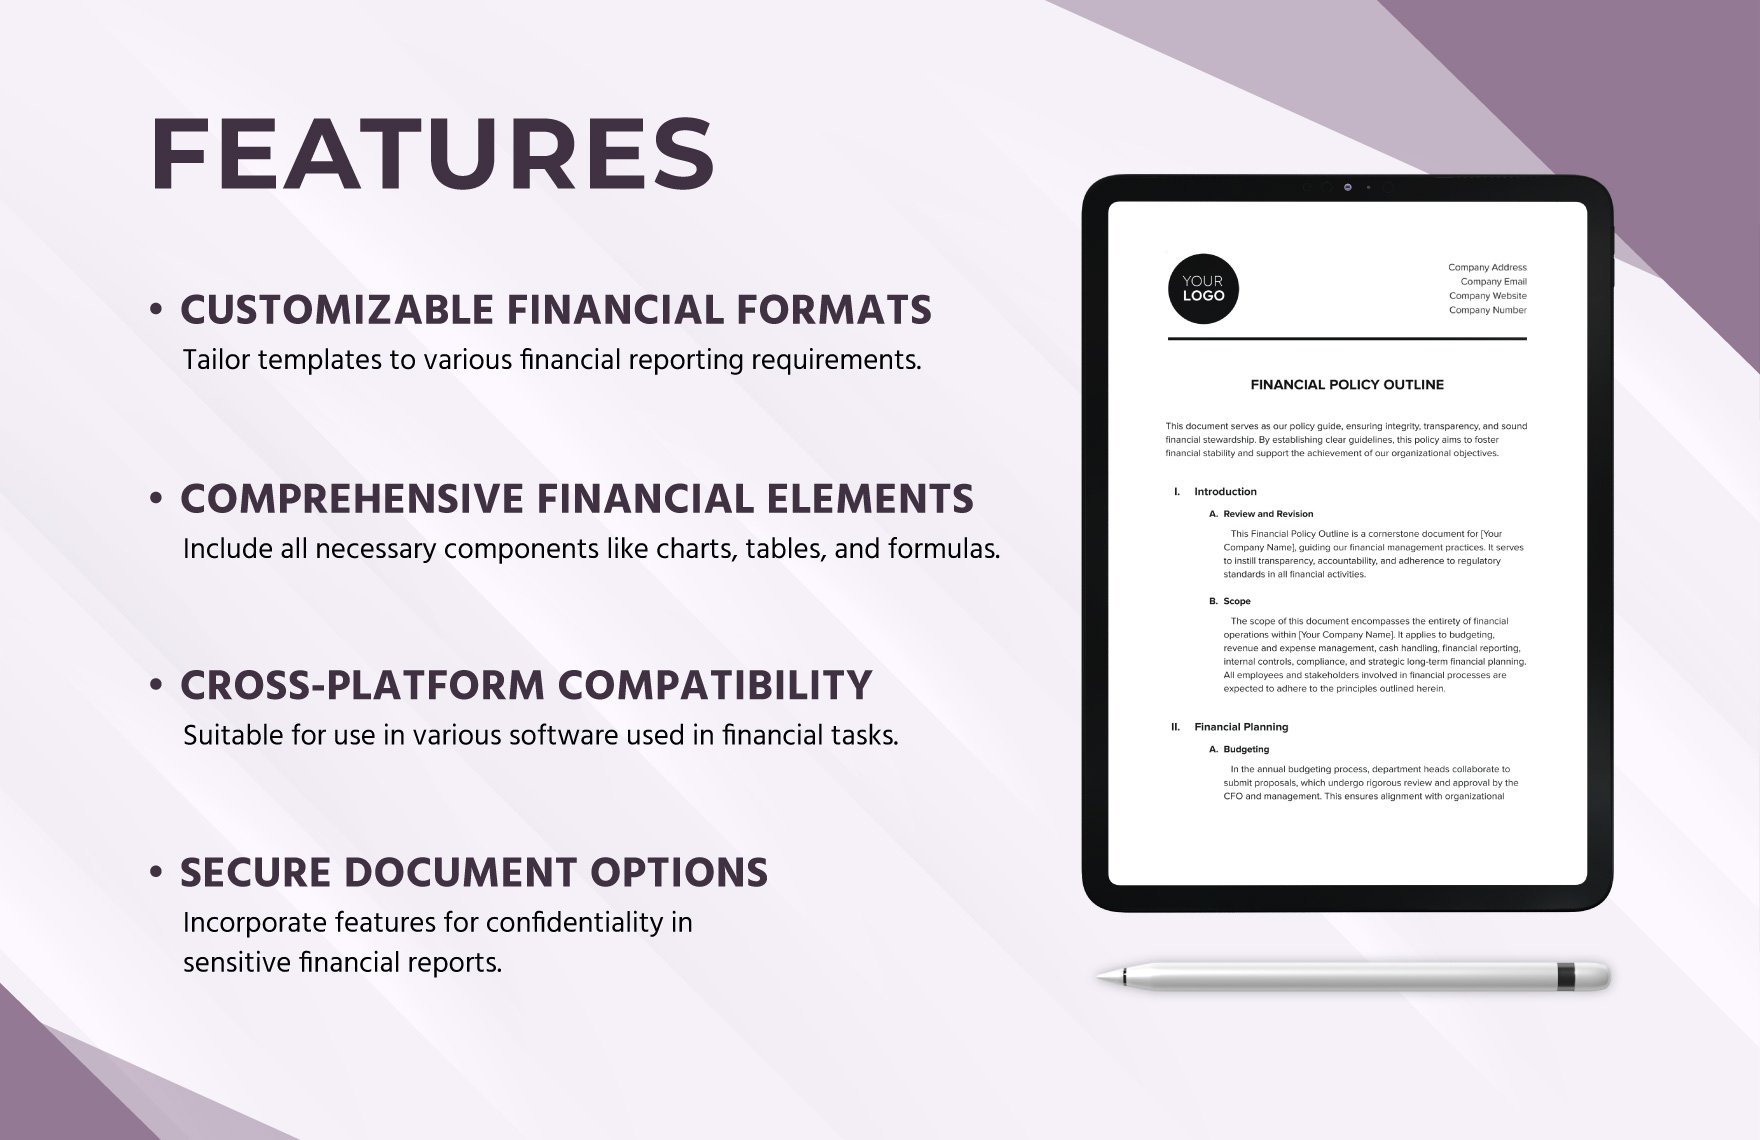 Financial Policy Outline Template